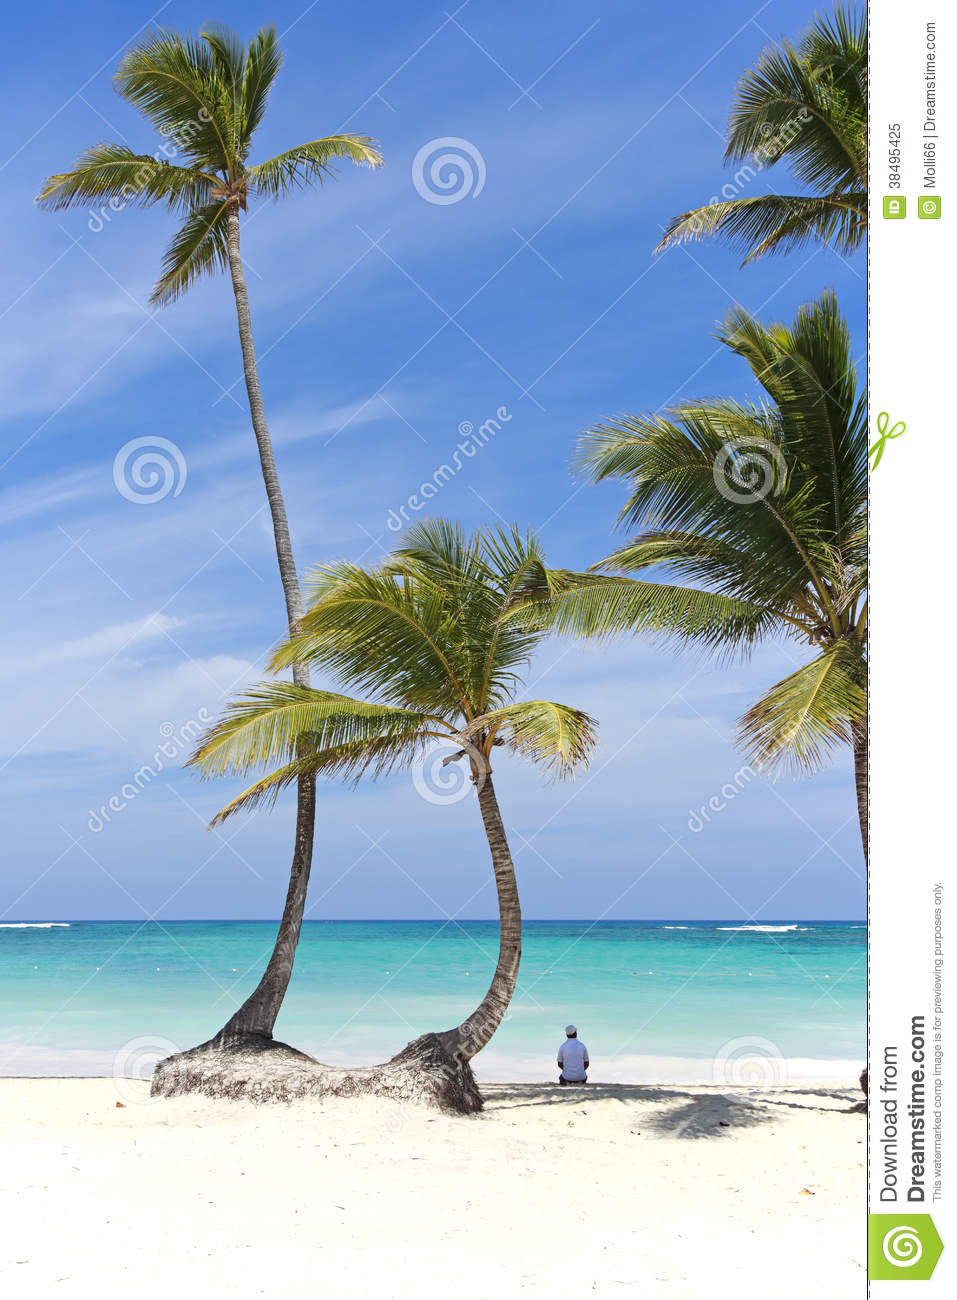 Man Sitting In The Shade Of Some Palm Trees On A Caribbean Beach In    